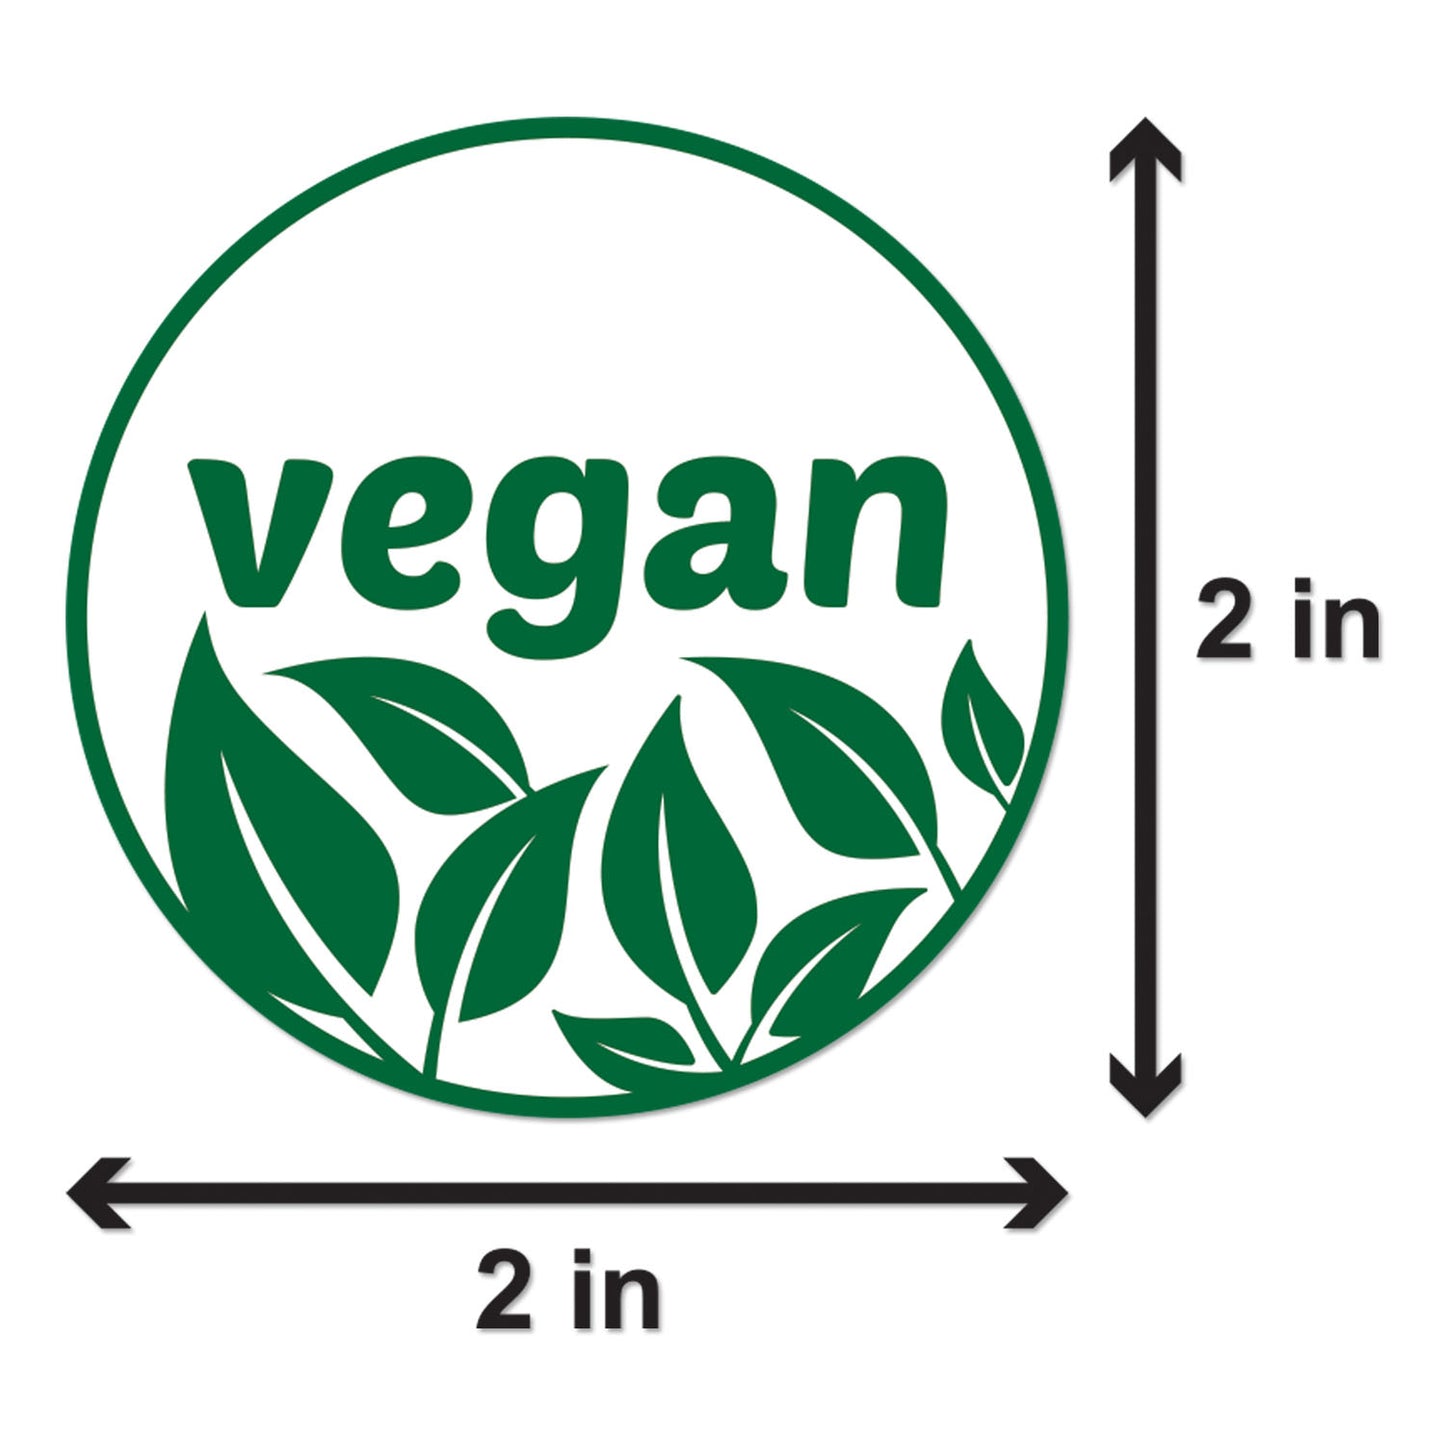 2 inch | Food Labeling: Vegan Stickers